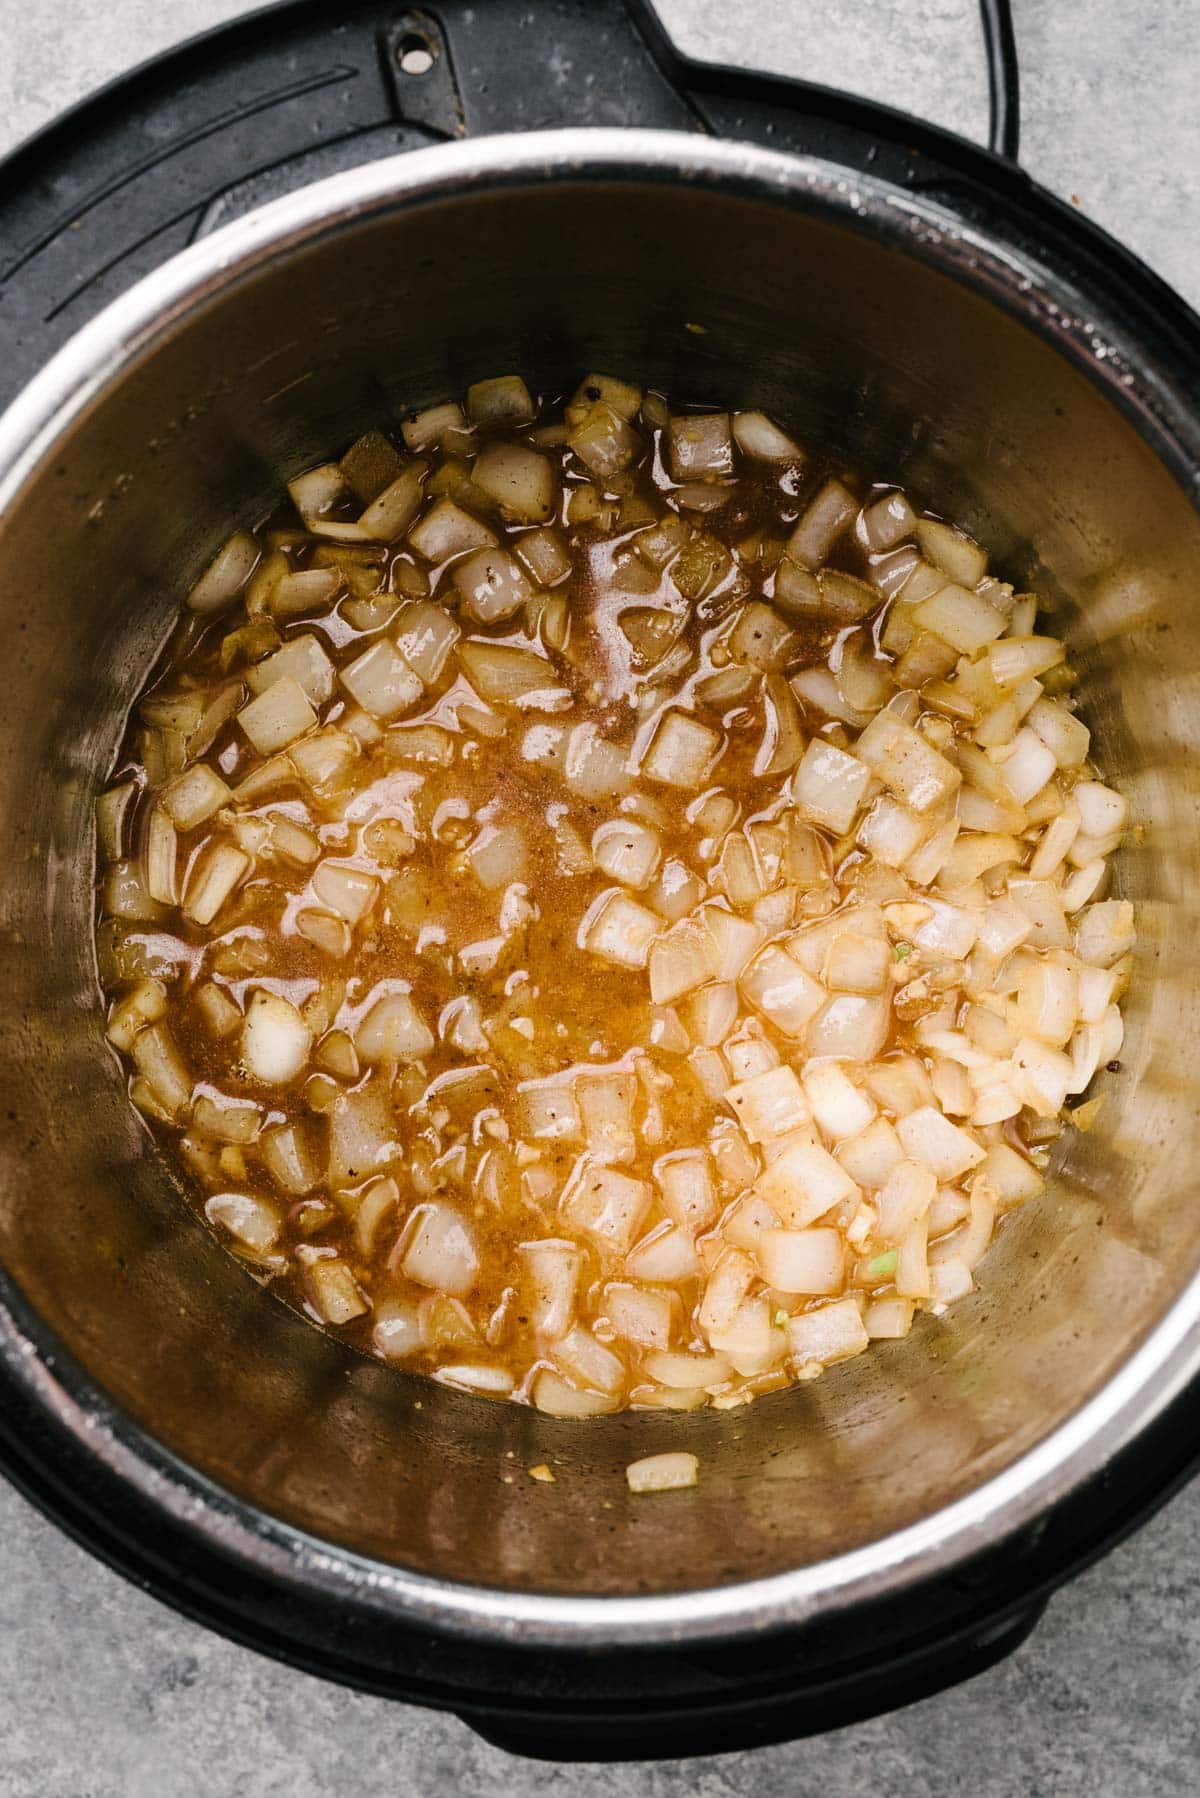 Wine added to sautéed onions and garlic in an Instant Pot to deglaze the surface and prepare for pressure cooking.